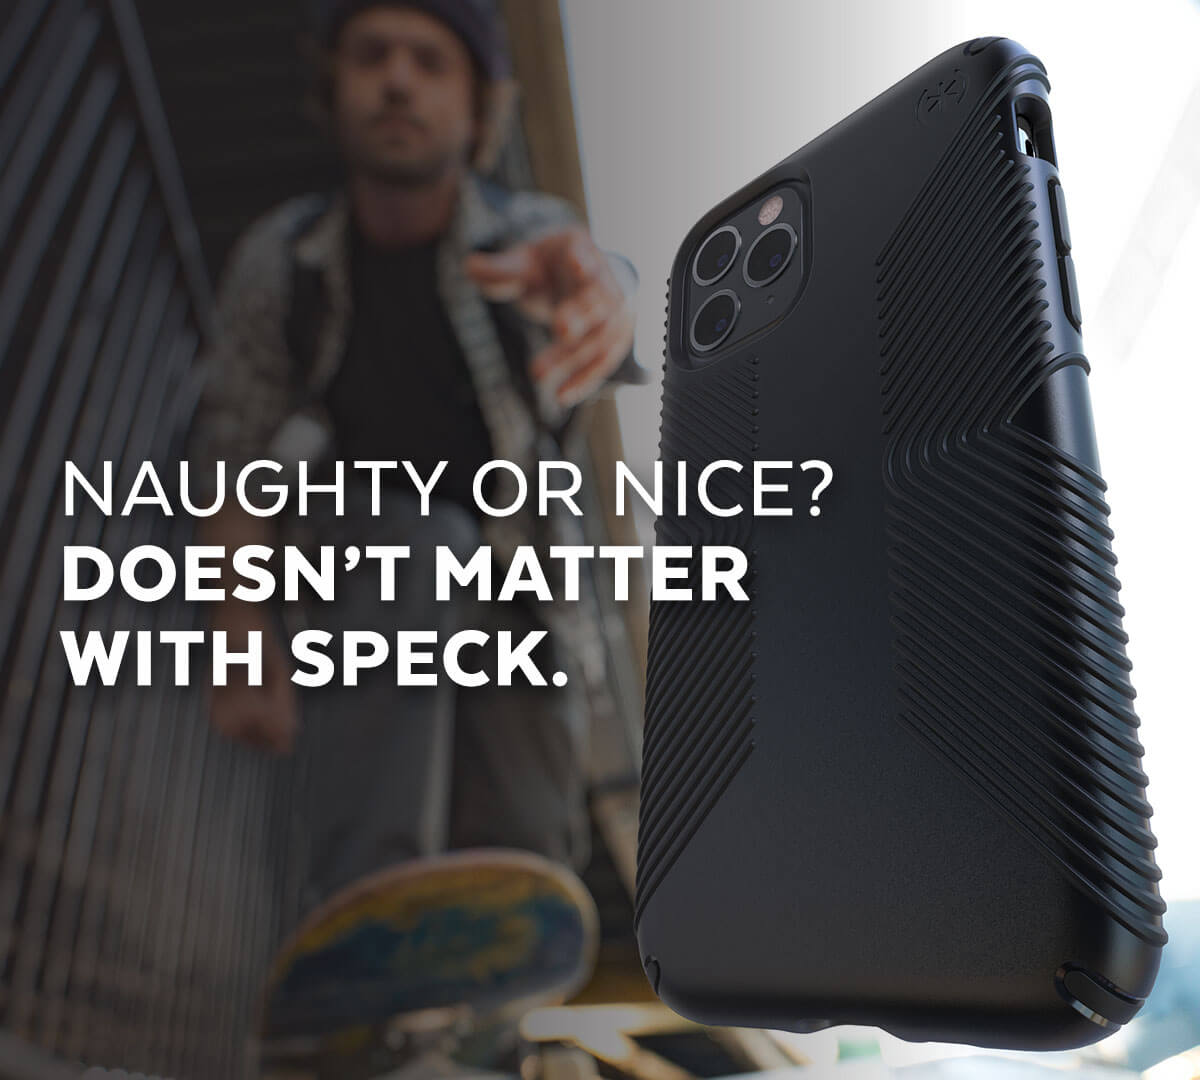 Naughty or nice? Doesn't matter with Speck.